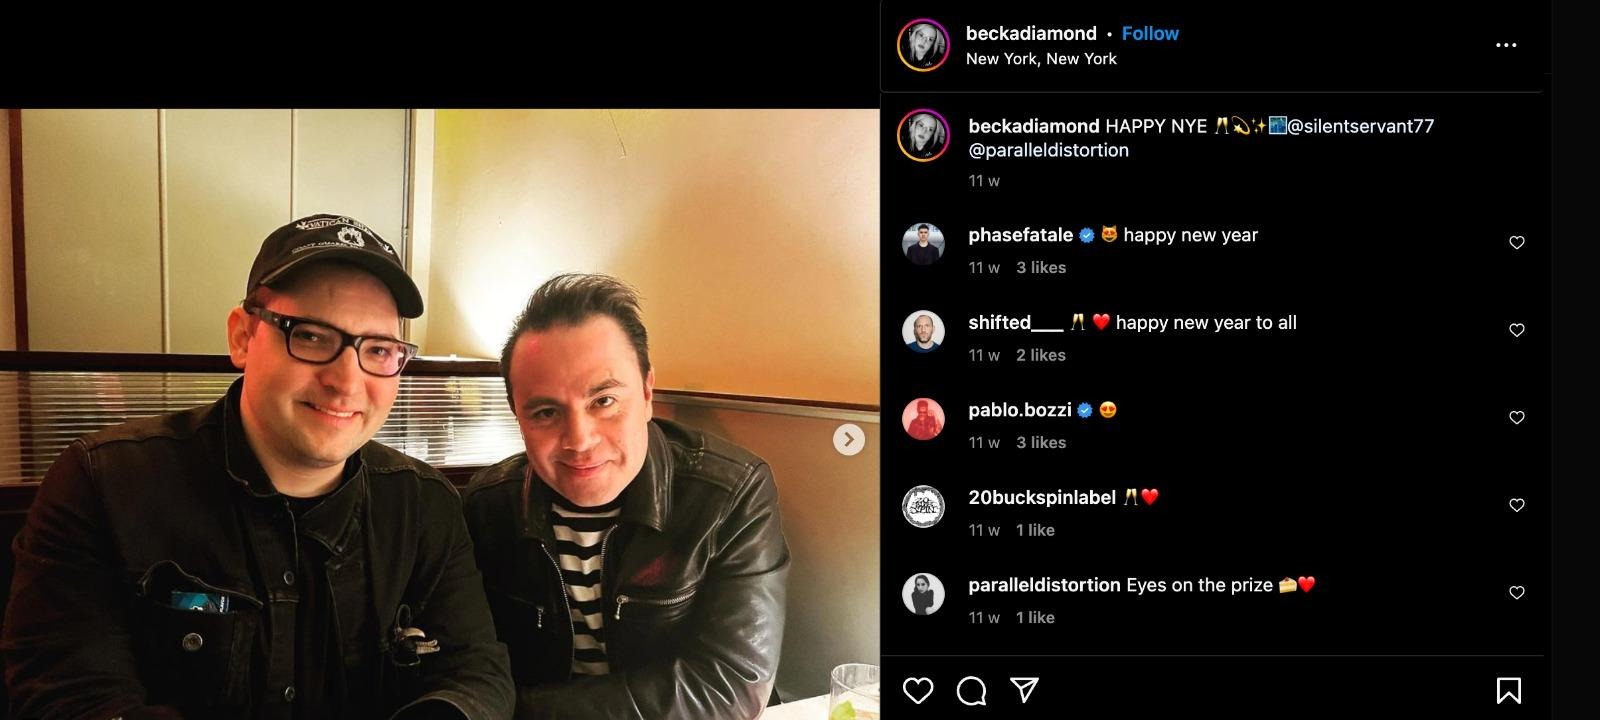 Screenshot of an instagram post from user @beckadiamond. At left, Dominick Fernow is wearing black plastic glasses, a black hat that says "Vatican Shadow" on it, a black jean hacket. Silent Servant has short dark hair visible, and is wearing a black leather jacket and a striped black-and-white shirt. They are seated close together, looking into the camera, and in the background are walls and a lamp casting light on the walls behind them